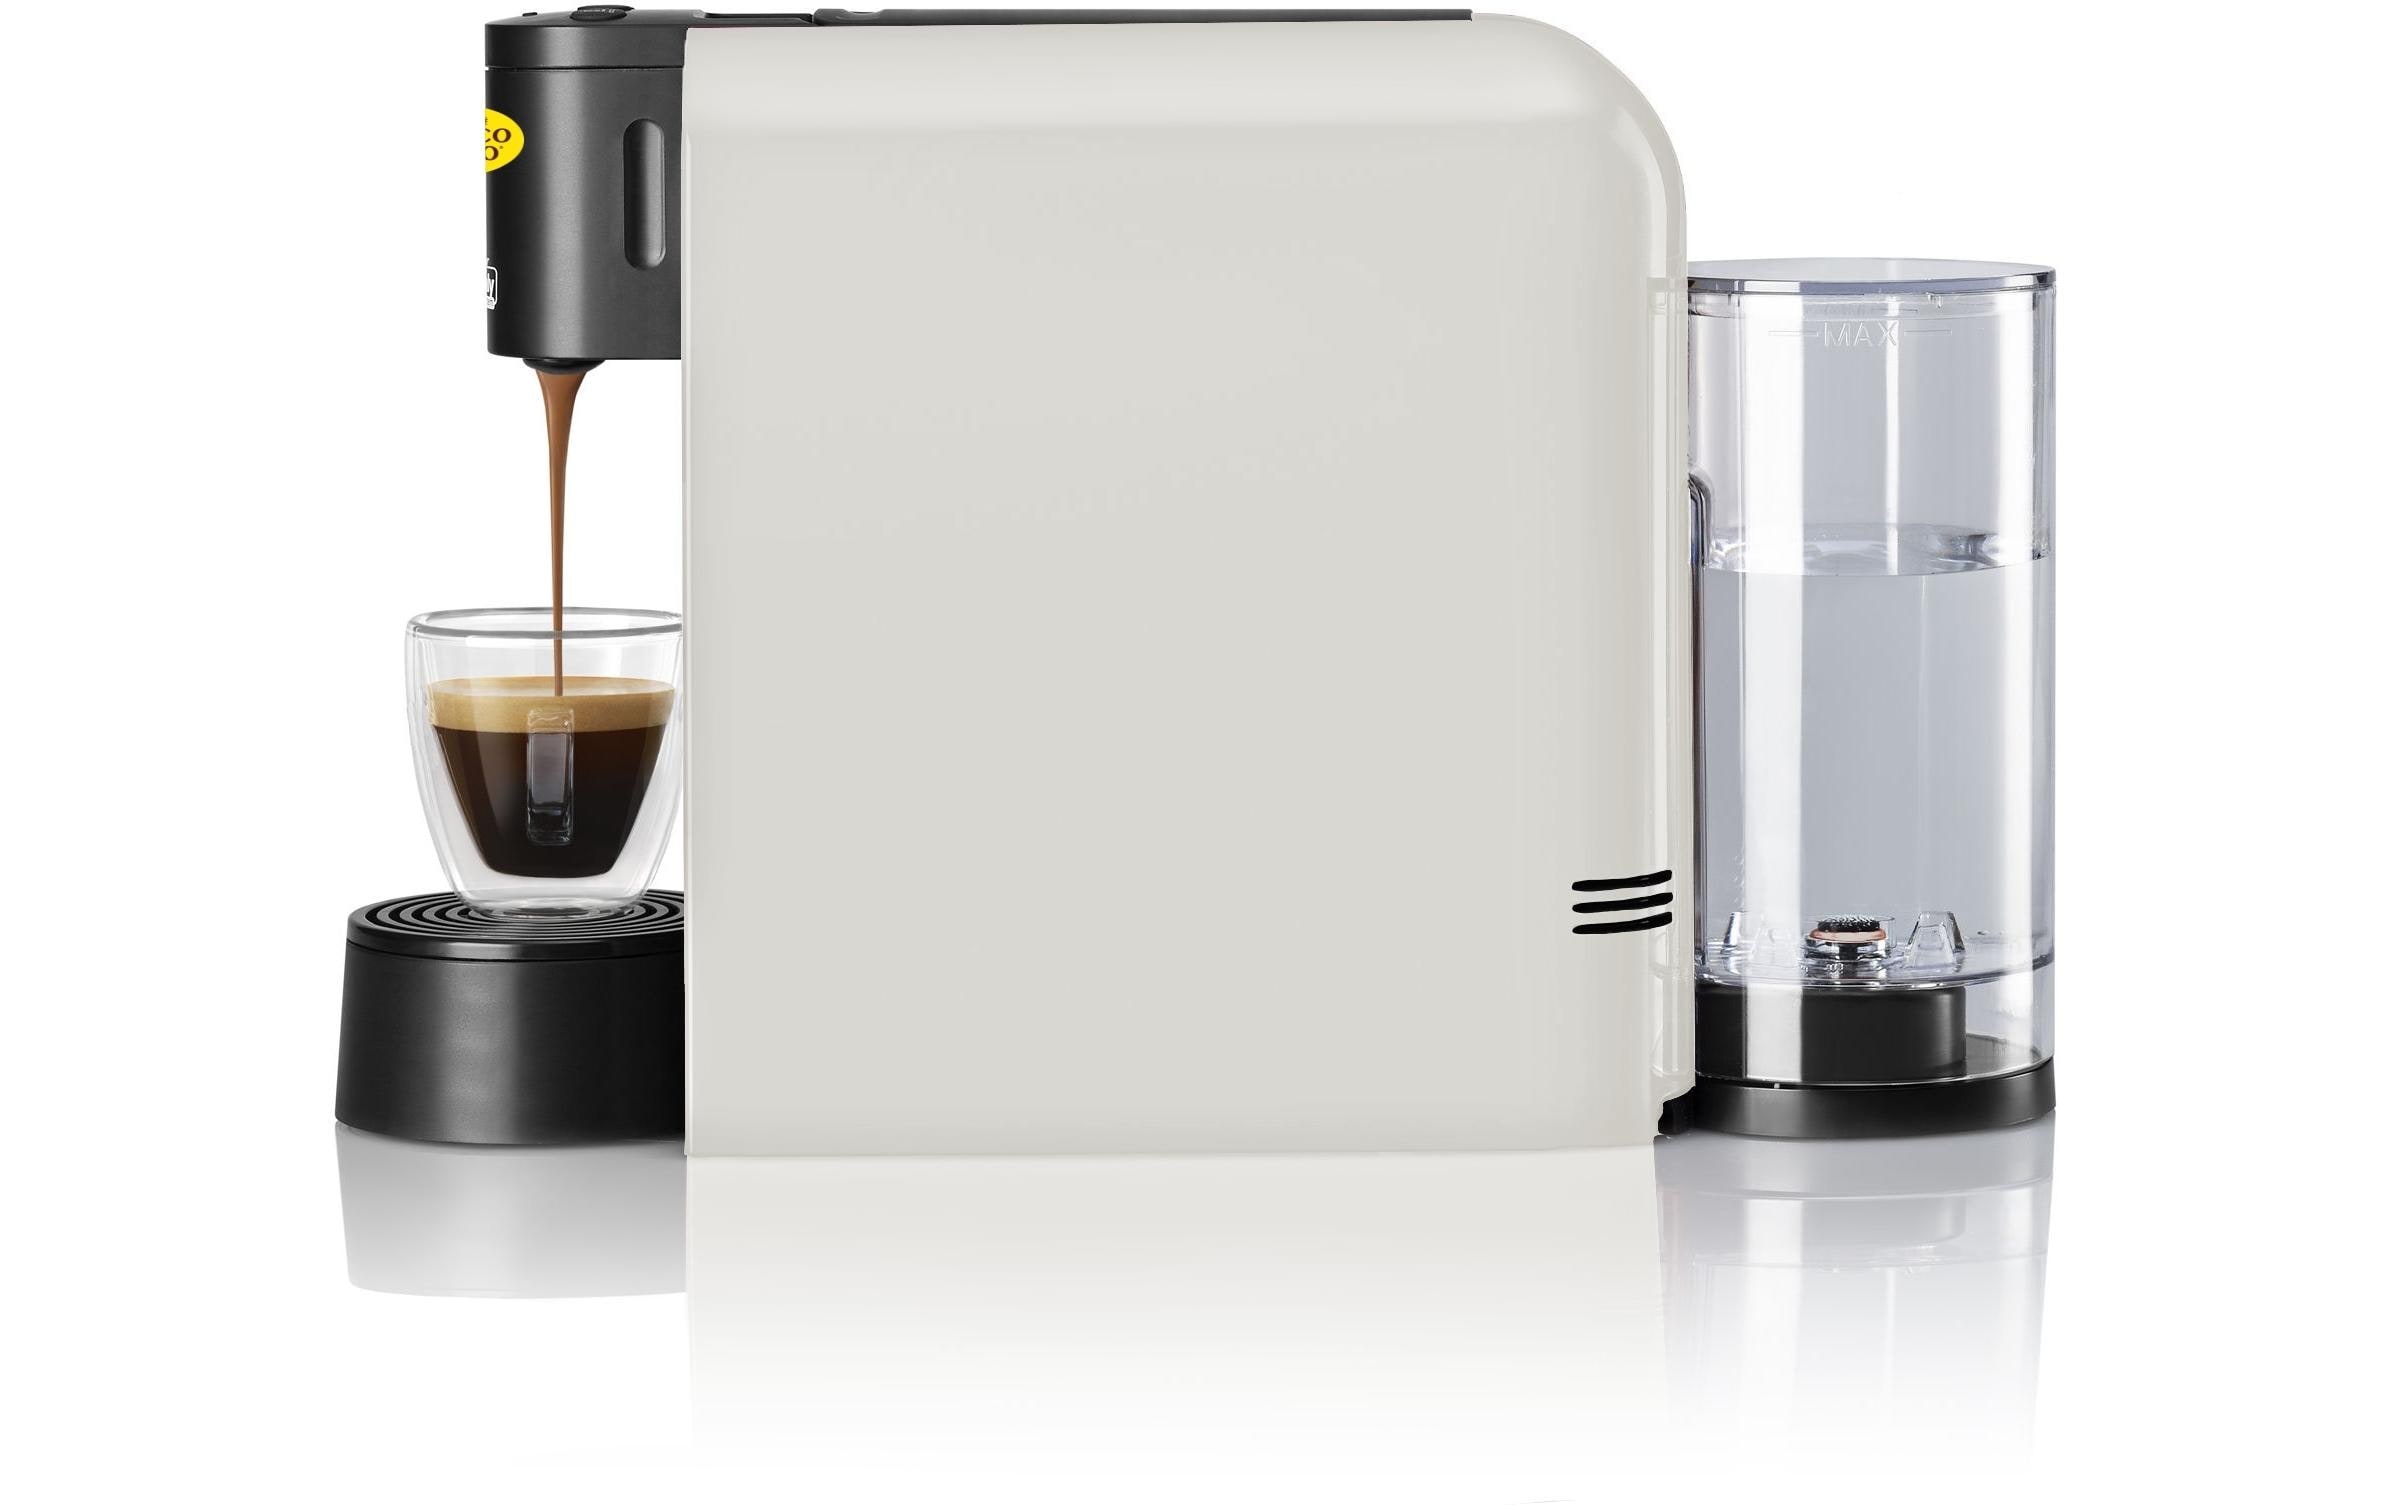 Kapselmaschine »Chicco d'Oro Caffitaly S33 Maia Weiss«